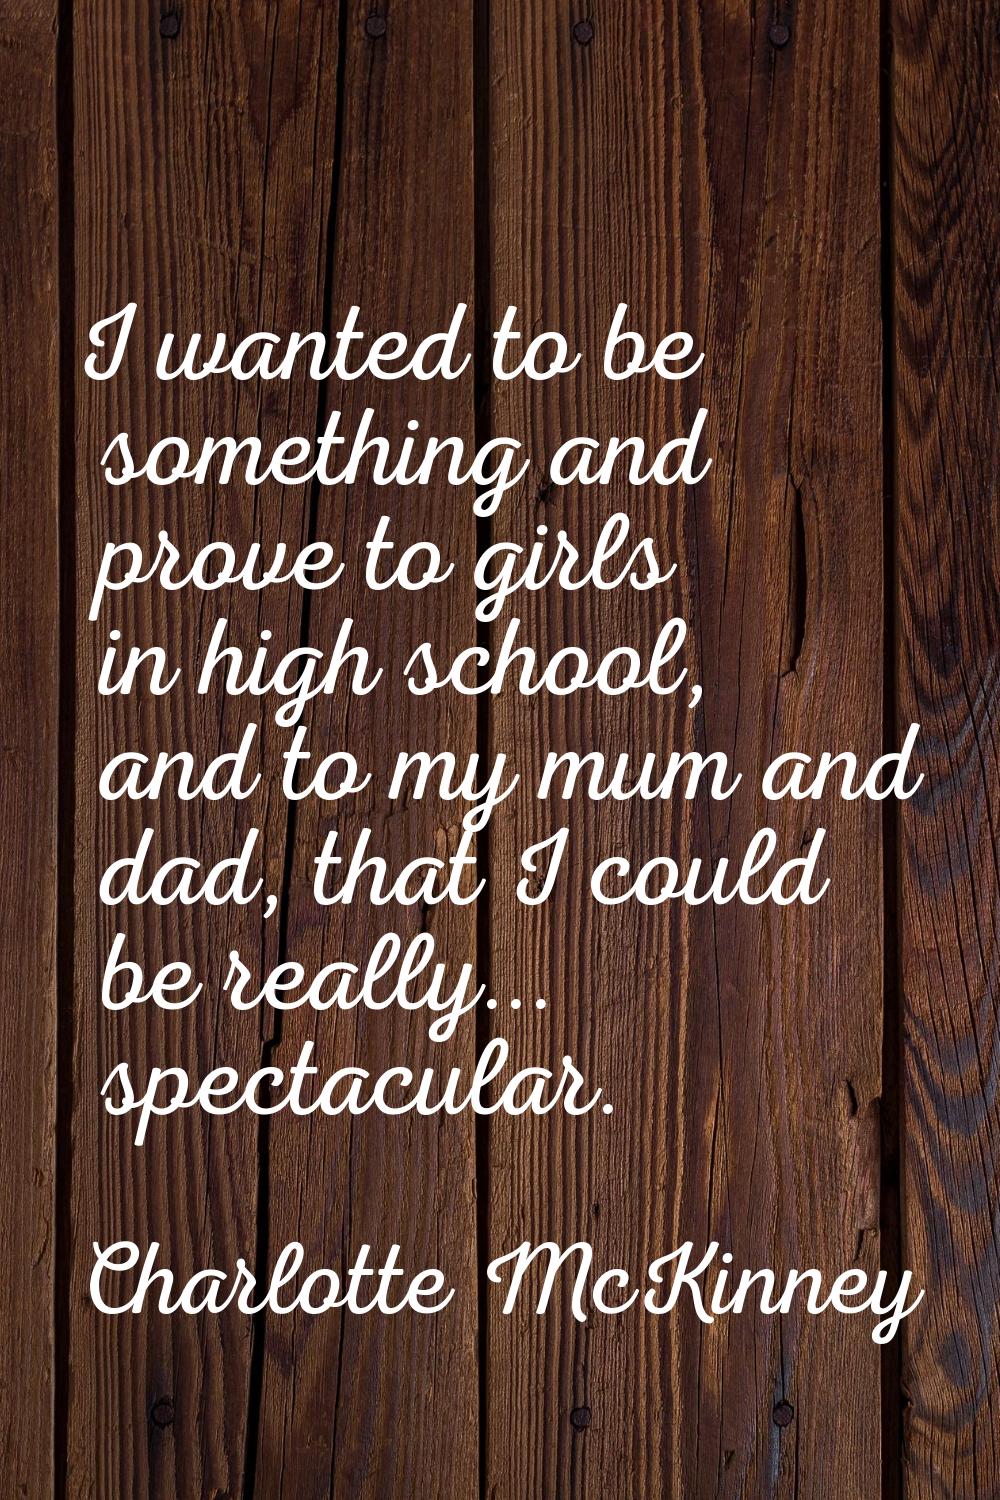 I wanted to be something and prove to girls in high school, and to my mum and dad, that I could be 